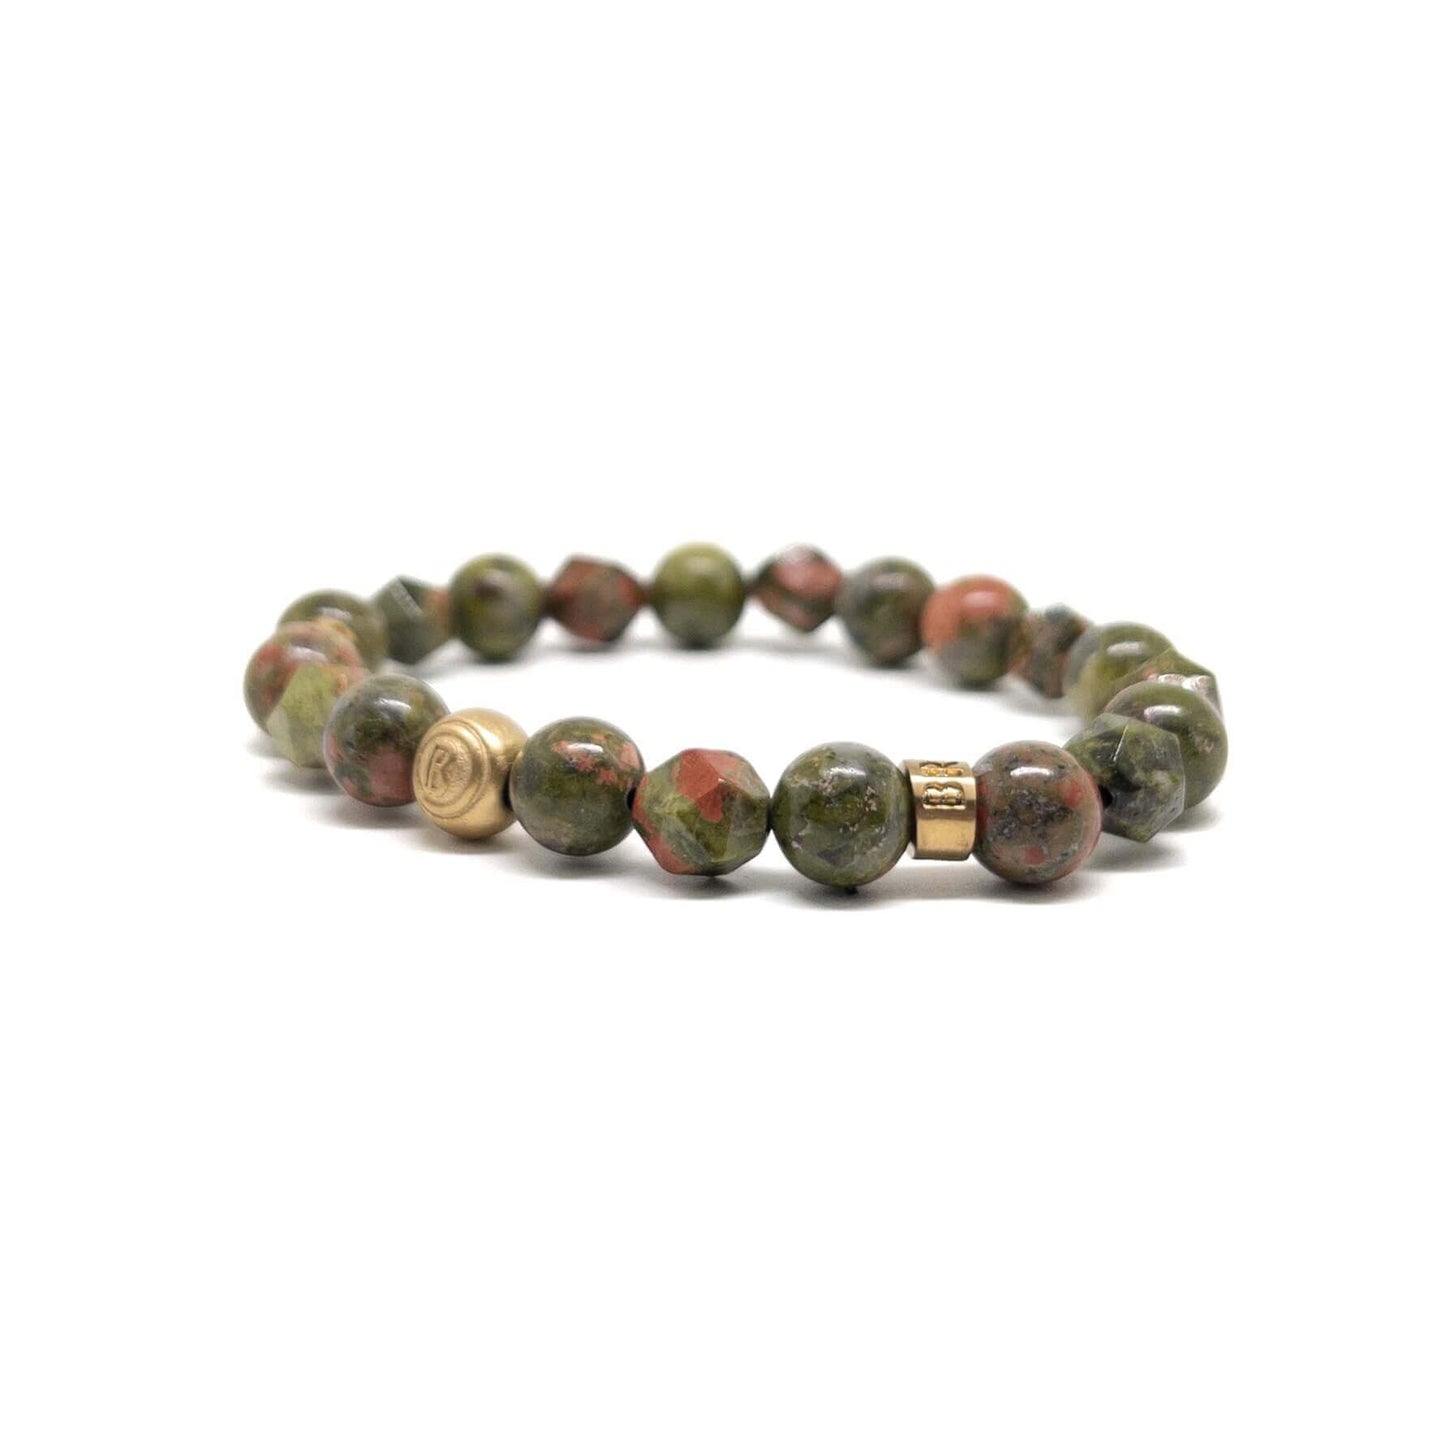 The Unakite Signed Gold Plated Bracelet